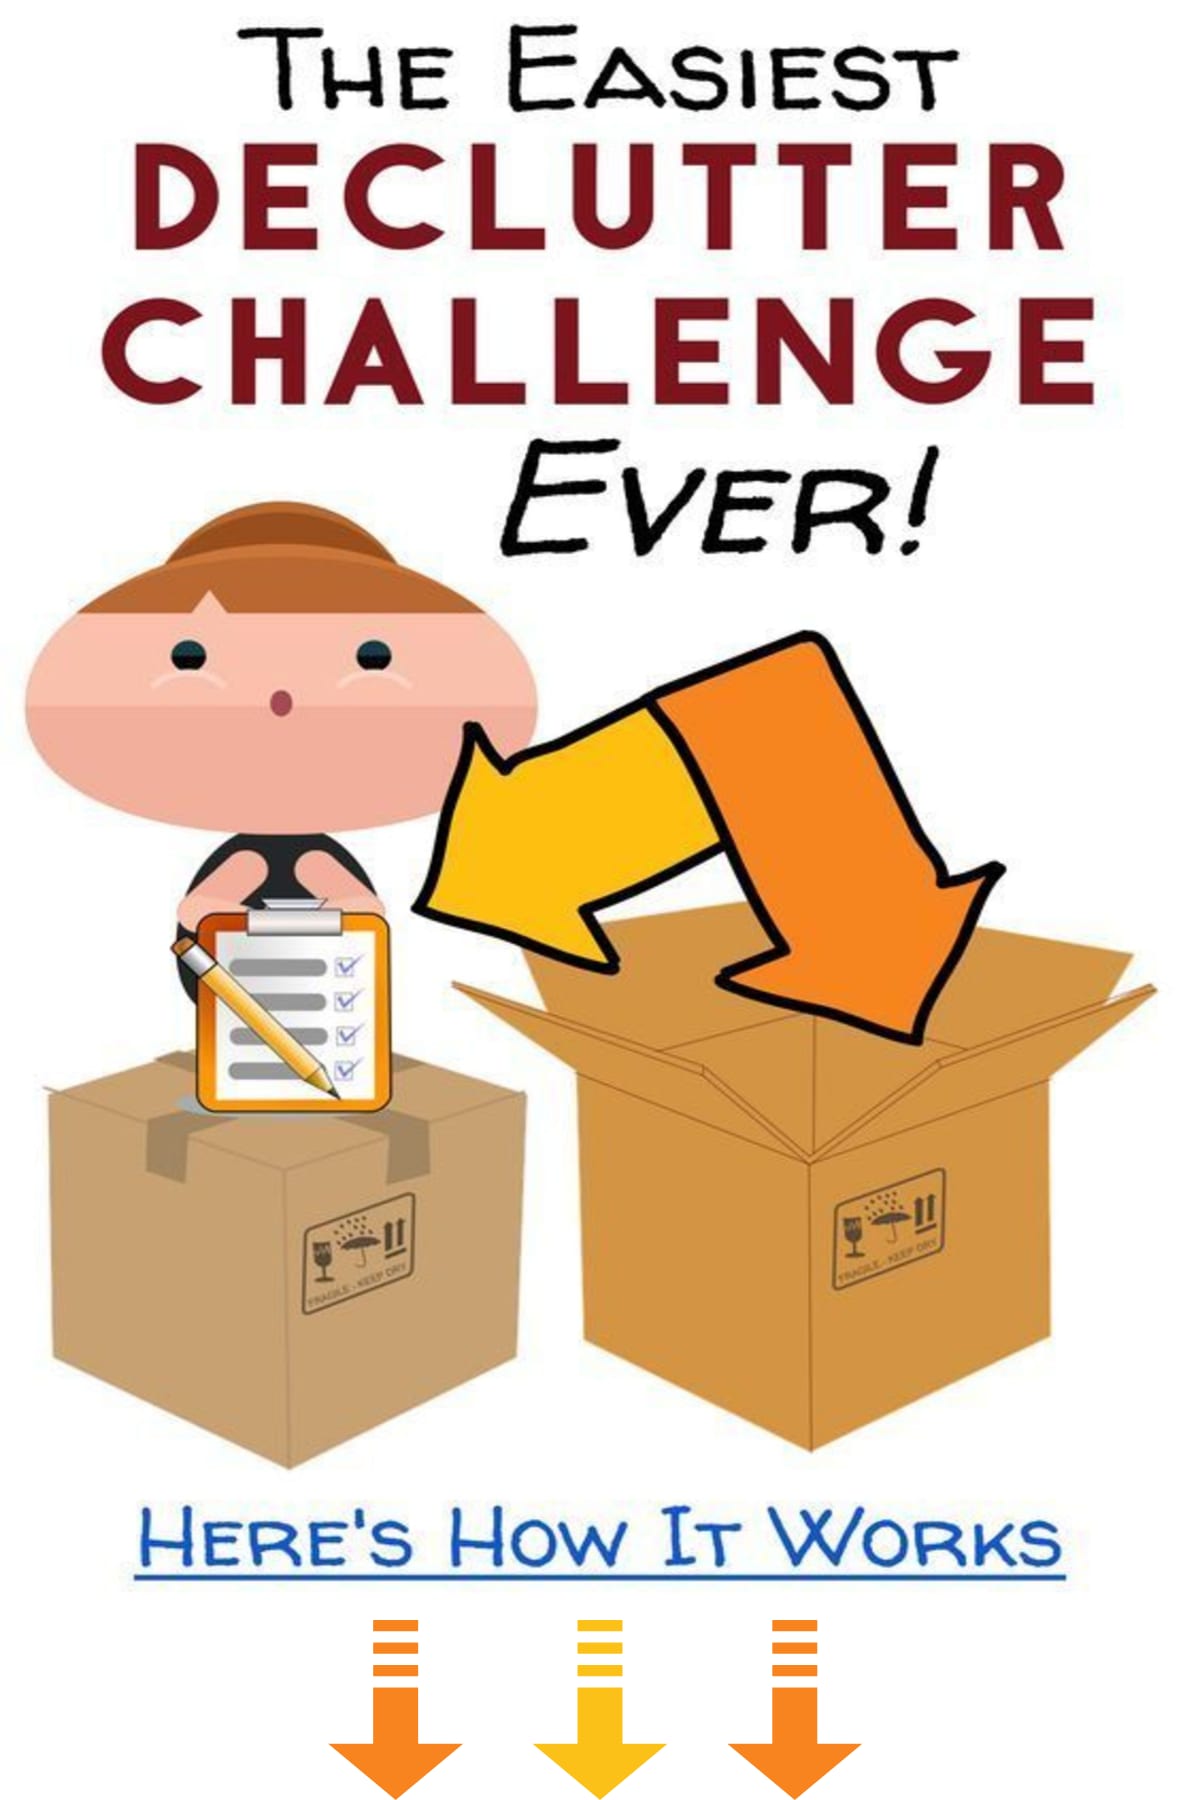 Declutter challenge-easy way to declutter your home WITHOUT feeling overwhelmed